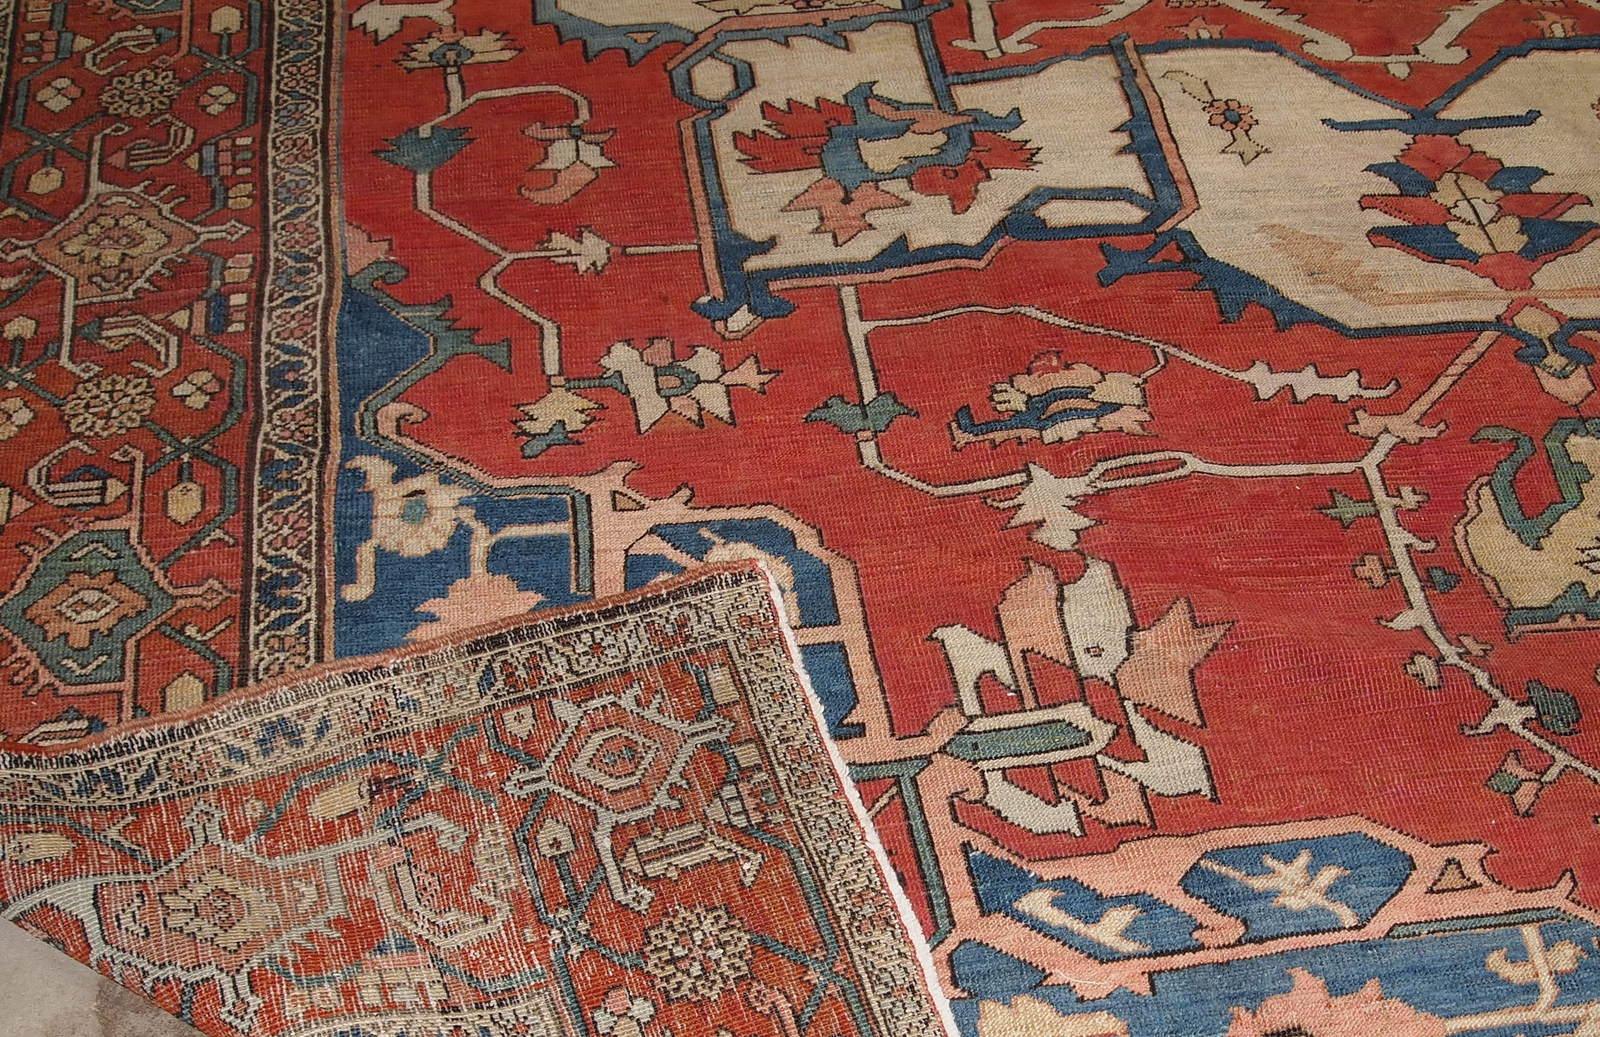 Antique handwoven Serapi rug from the end of 19th century. It is in good condition, made in red, navy blue and sky blue wool.

-condition: good,

-circa: 1880s,

-size: 8.10' x 11.7' (72cm x 356cm),

-material: wool,

-country of origin: